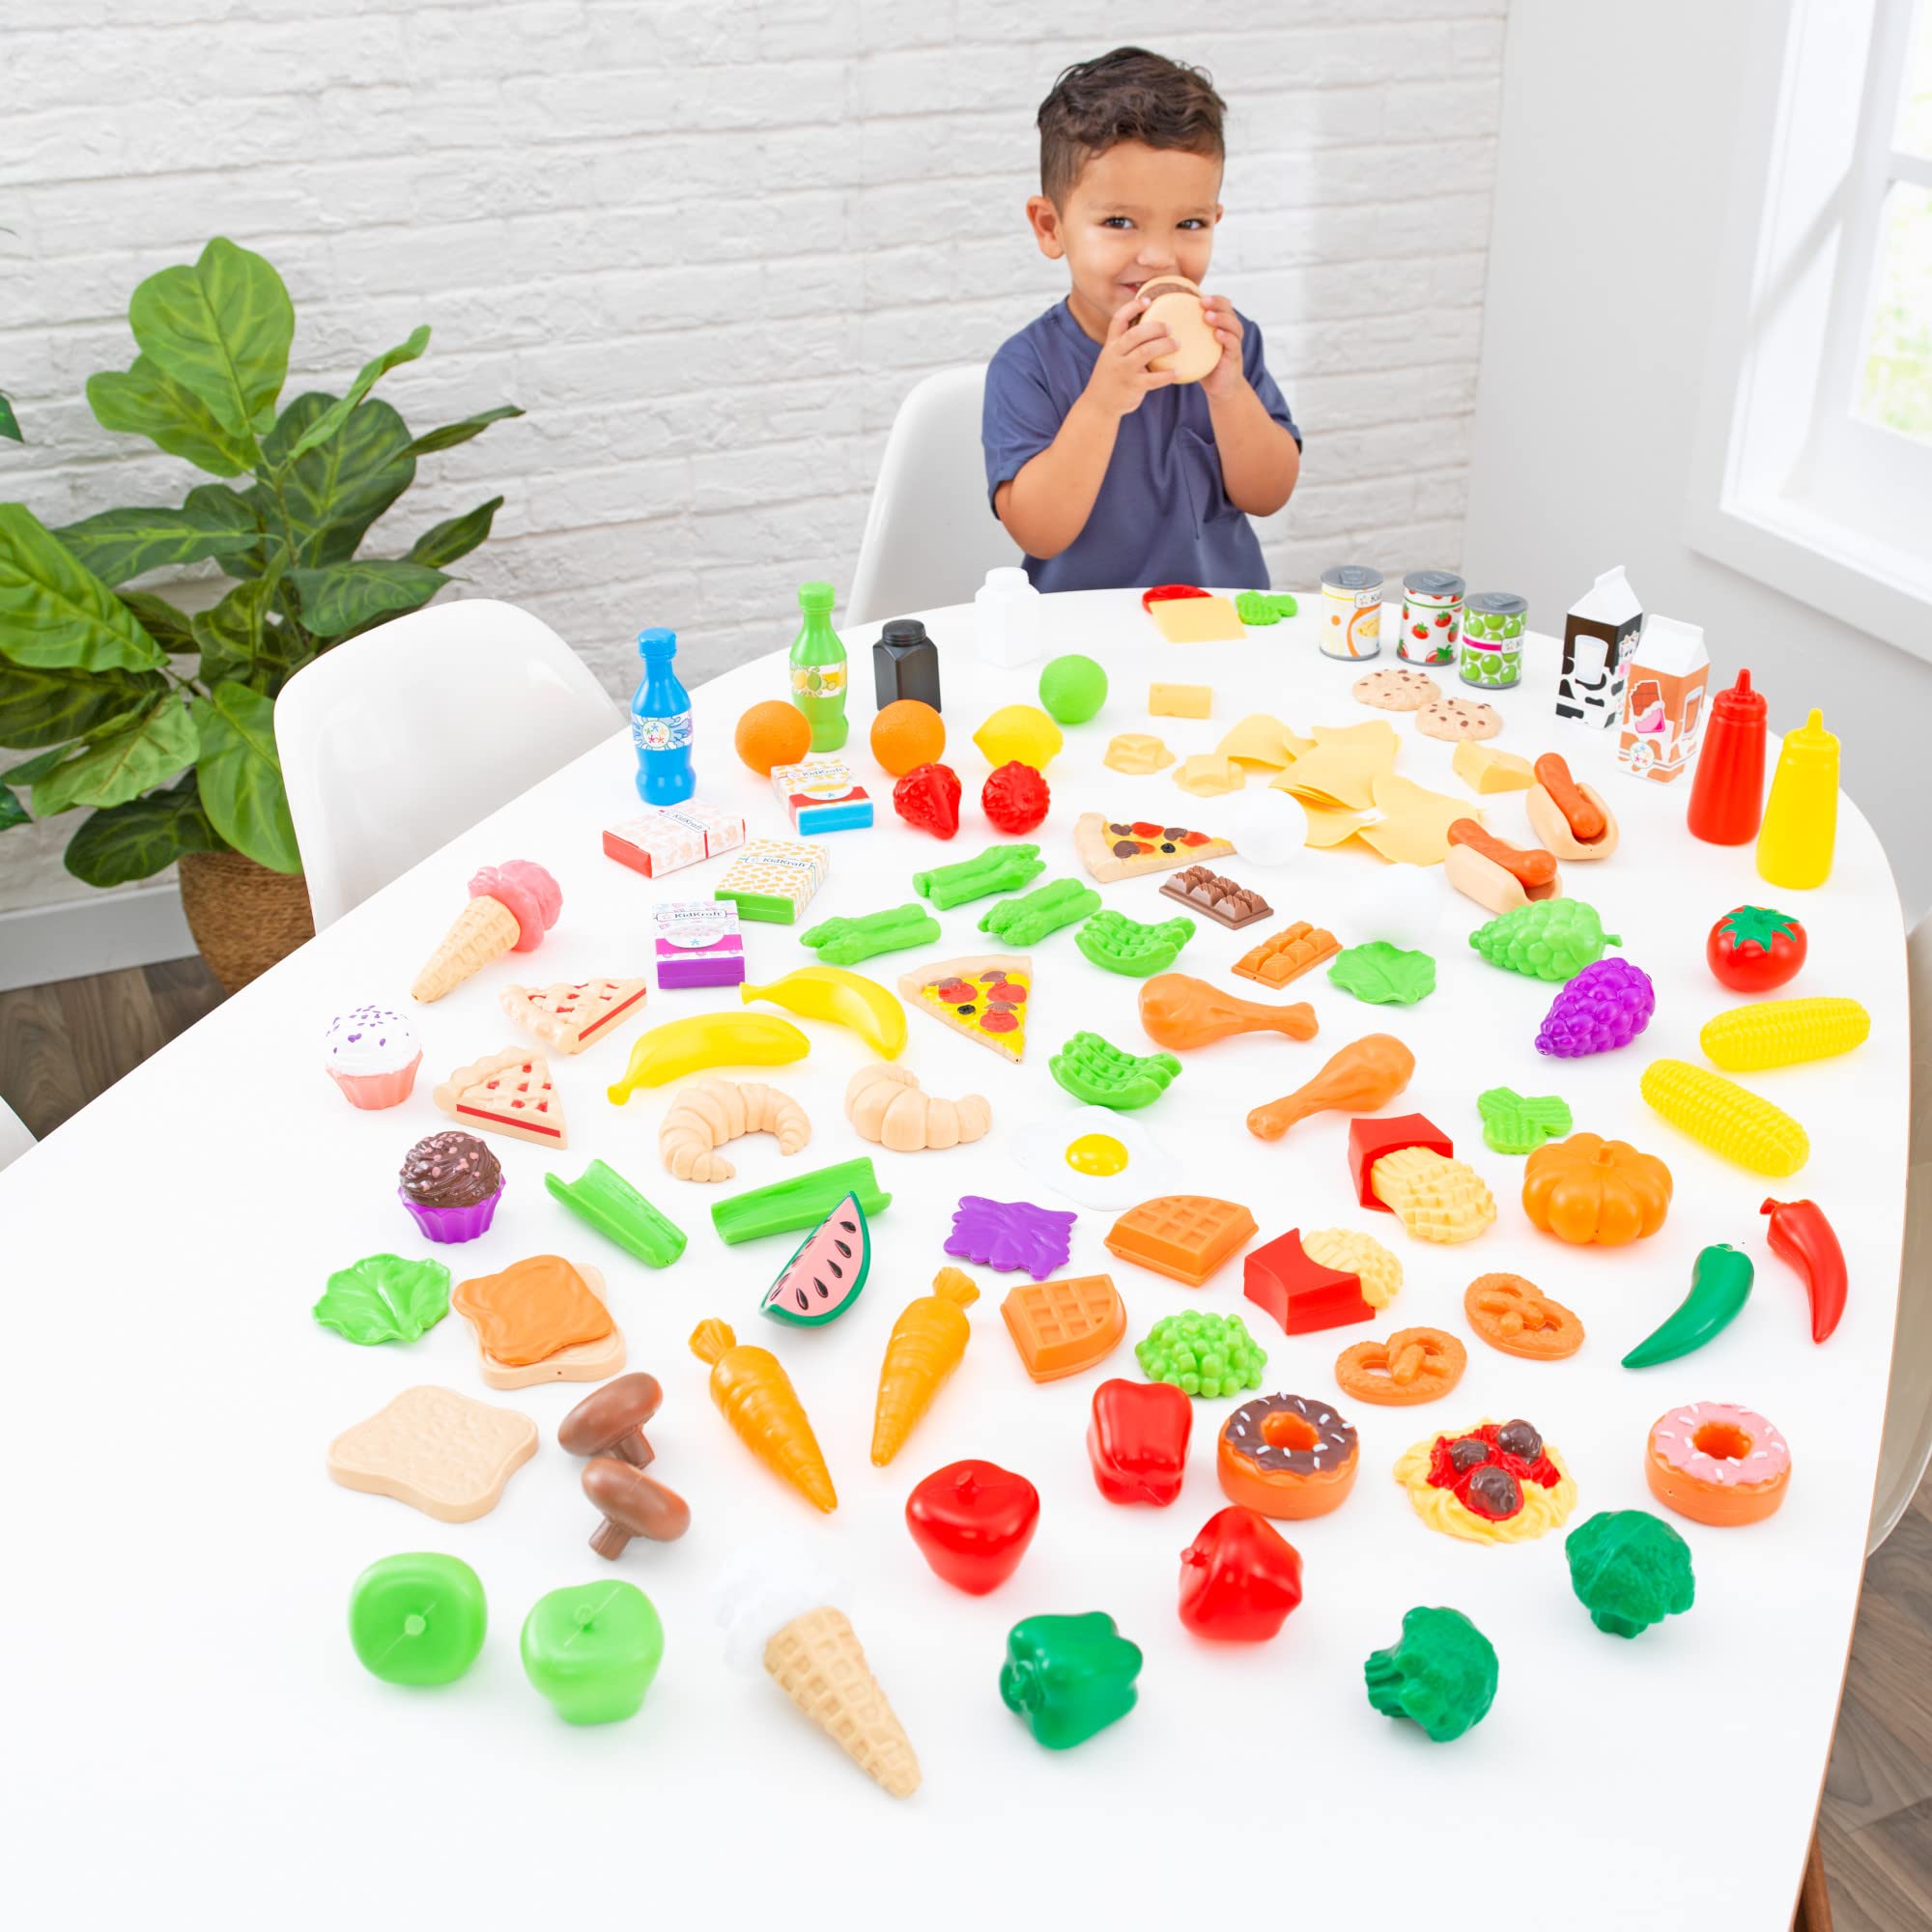 KidKraft 115-Piece Deluxe Tasty Treats Pretend Play Food Set, Plastic Grocery and Pantry Items, Gift for Ages 3+,Multicolor